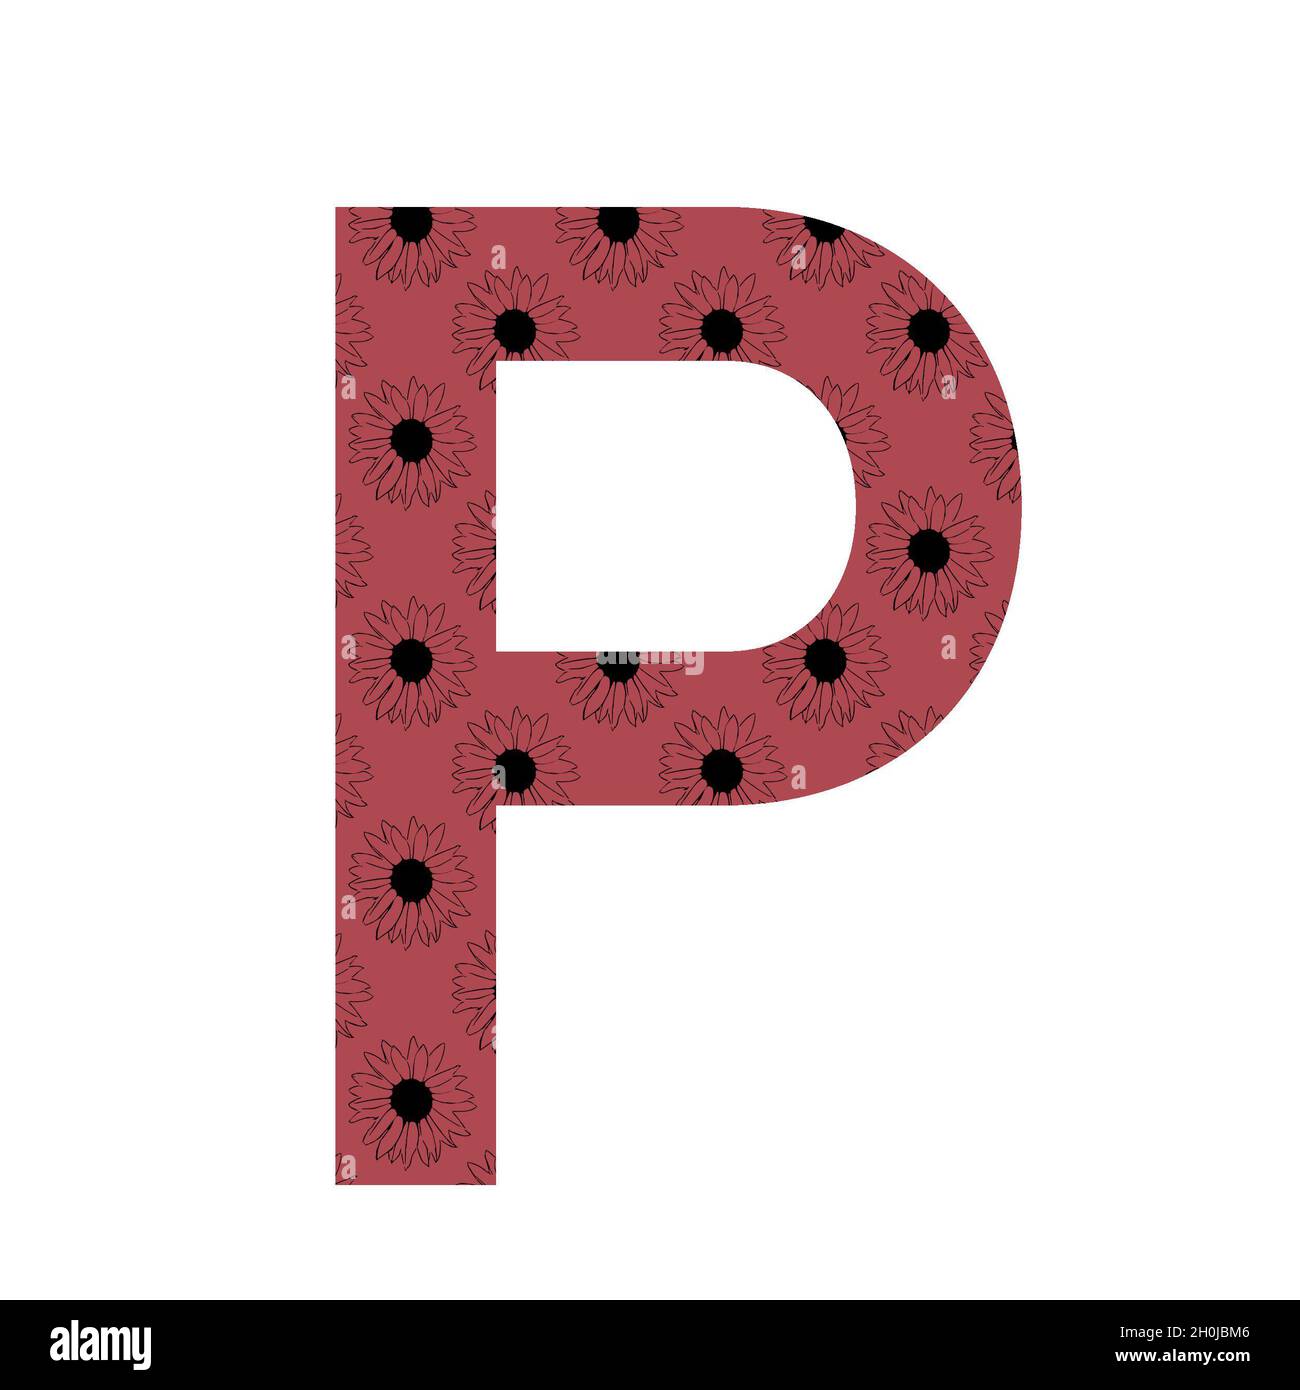 Letter P of the alphabet made with a pattern of sunflowers with a dark pink background, isolated on a white background Stock Photo